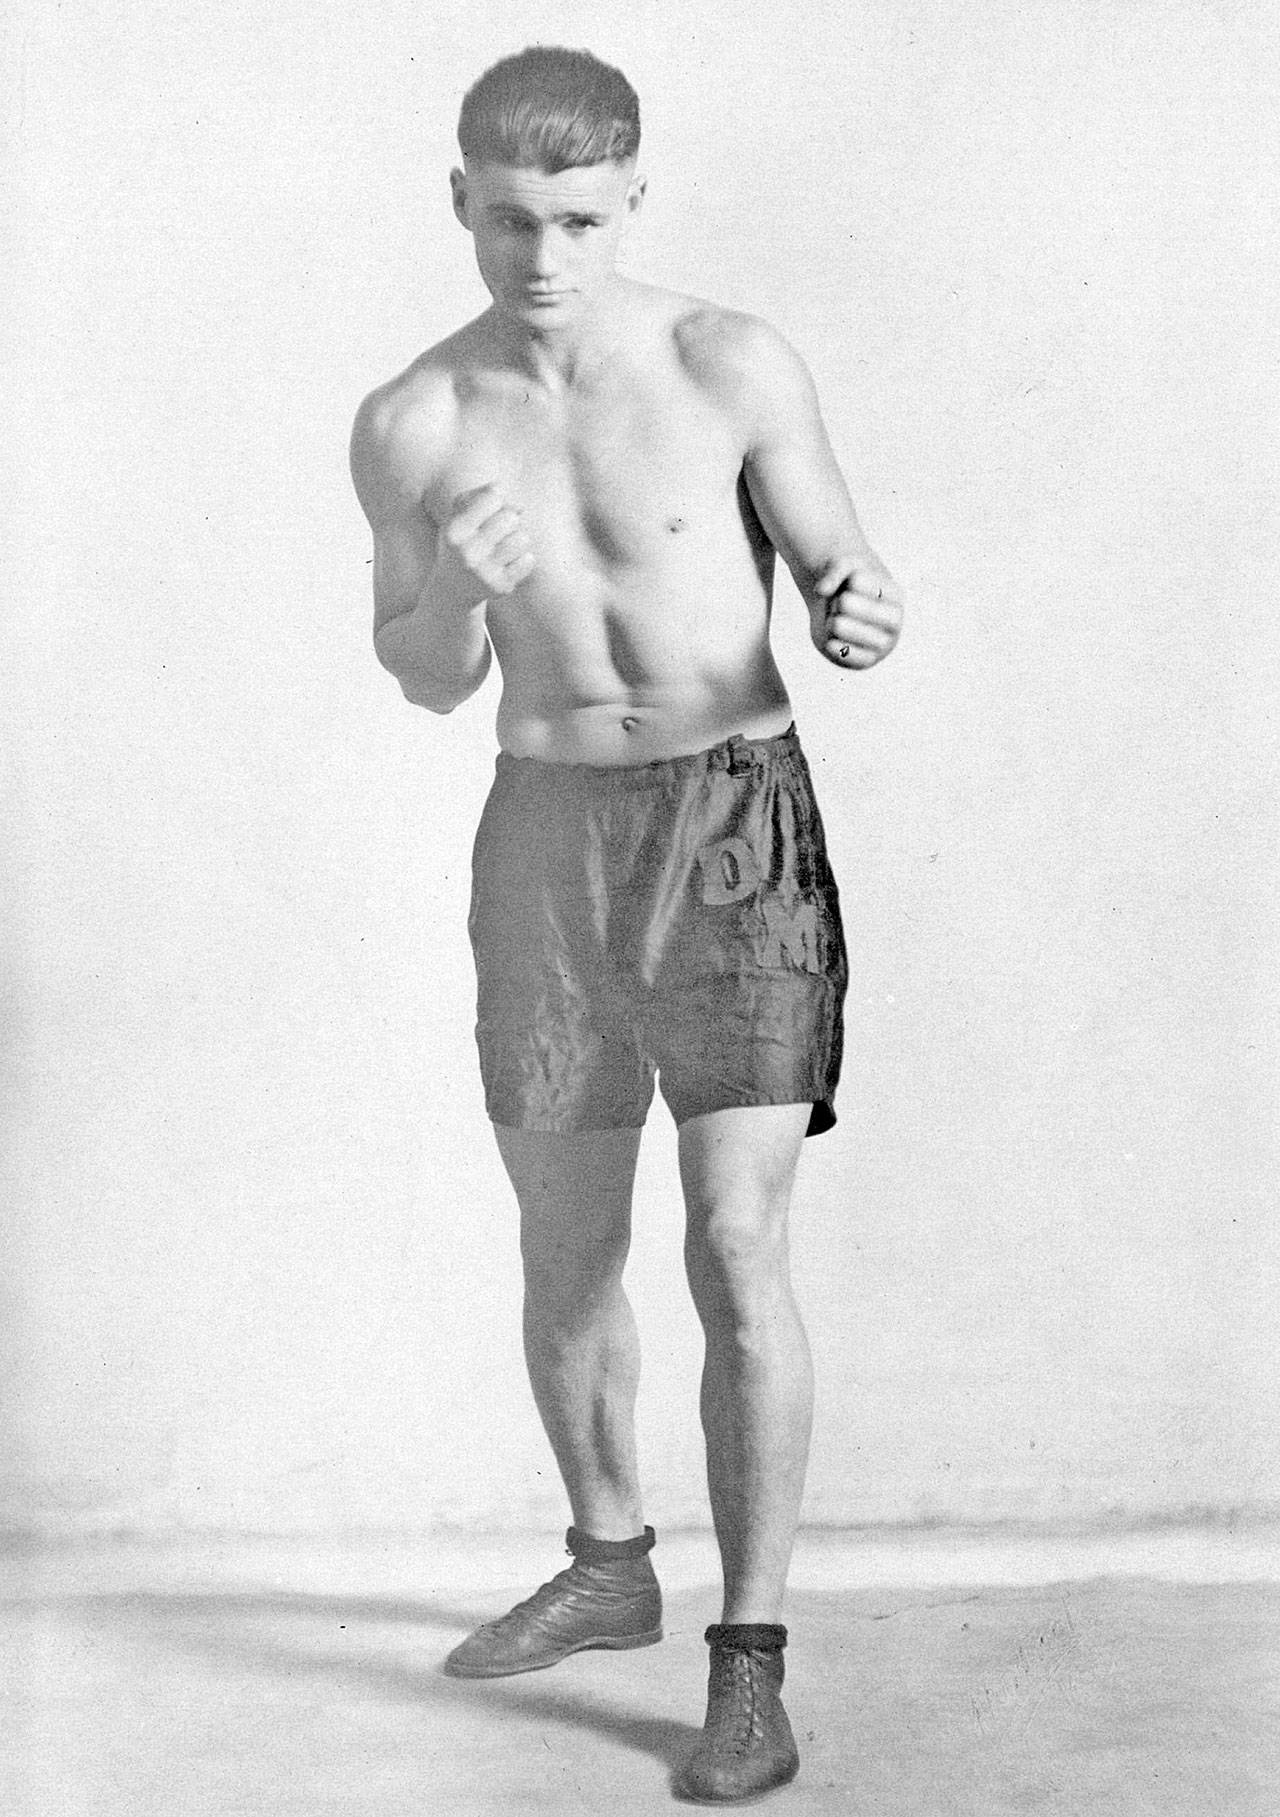 Danny Mathews’ promotional boxing photo from 1923. (John McNutt collection)